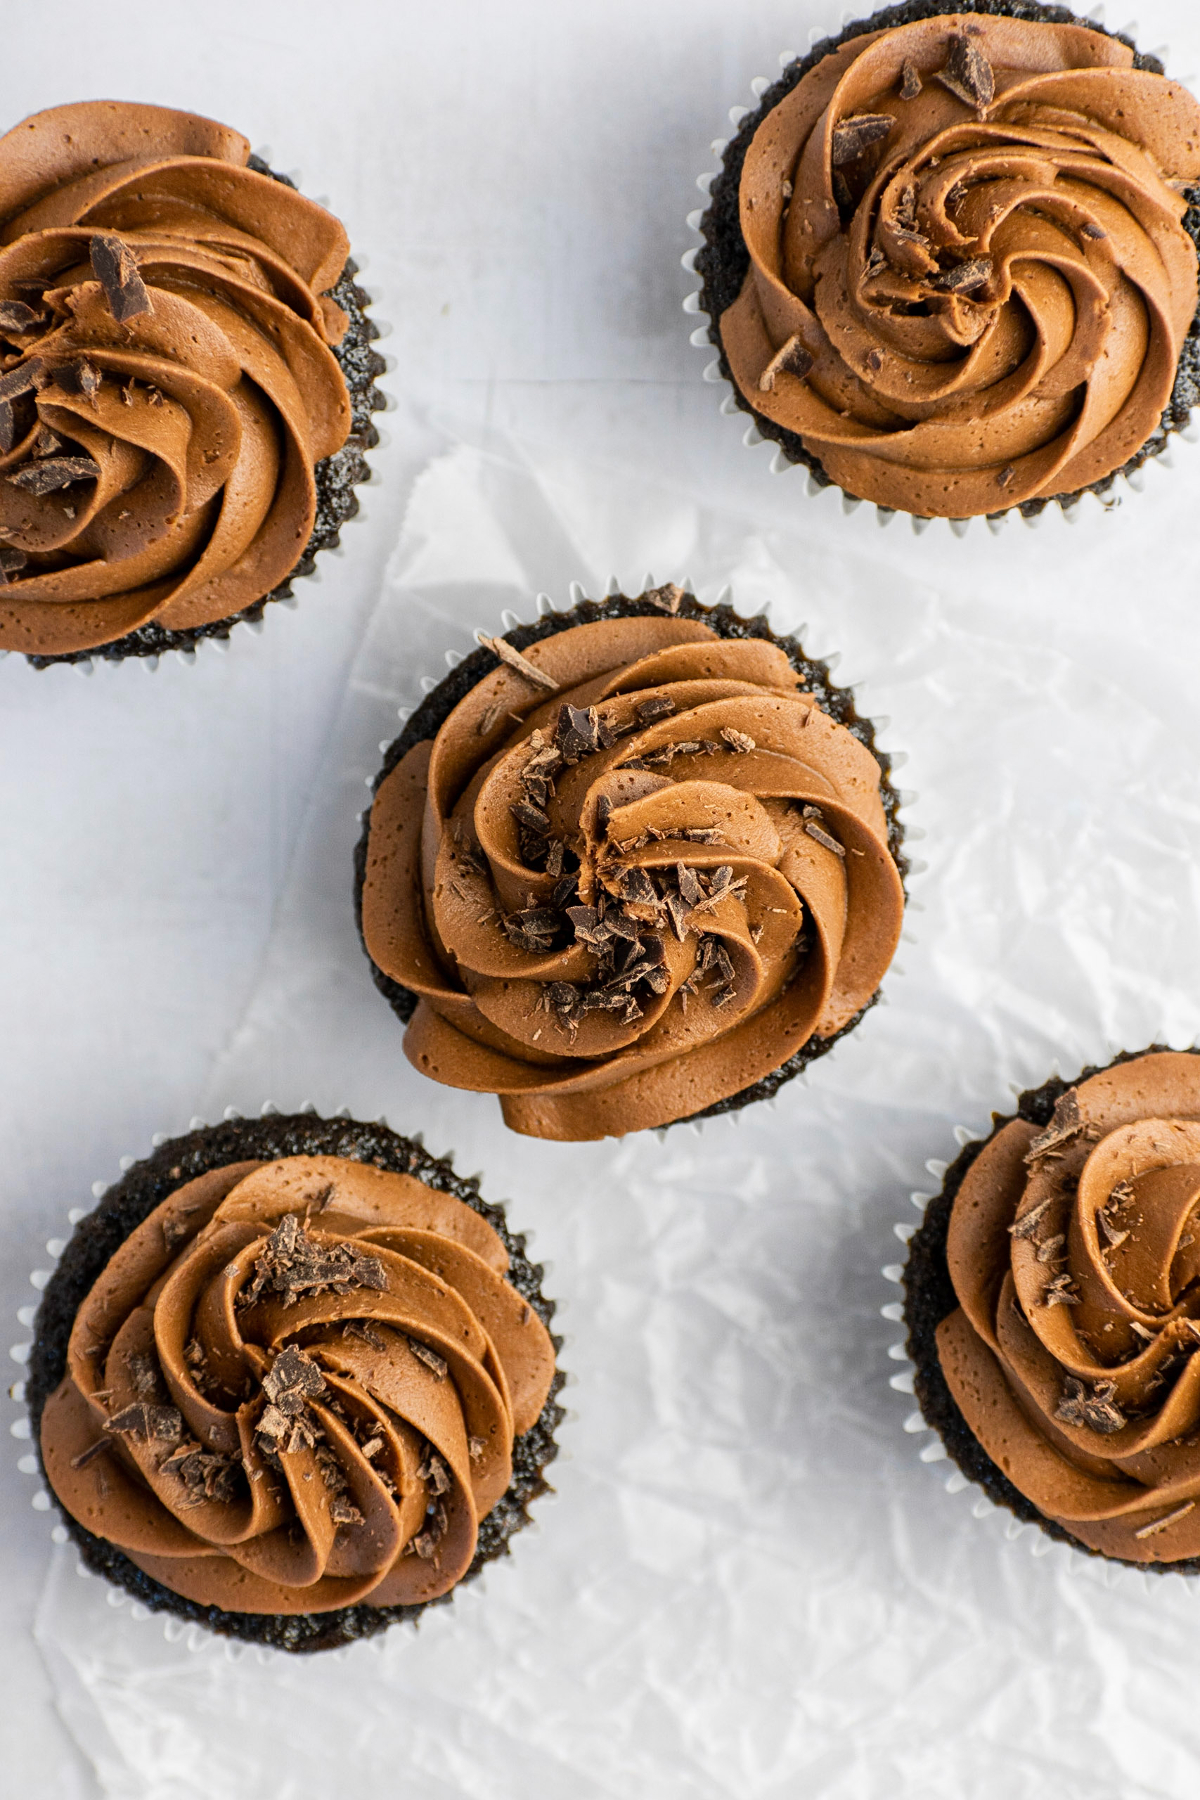 Frosted chocolate cupcakes.